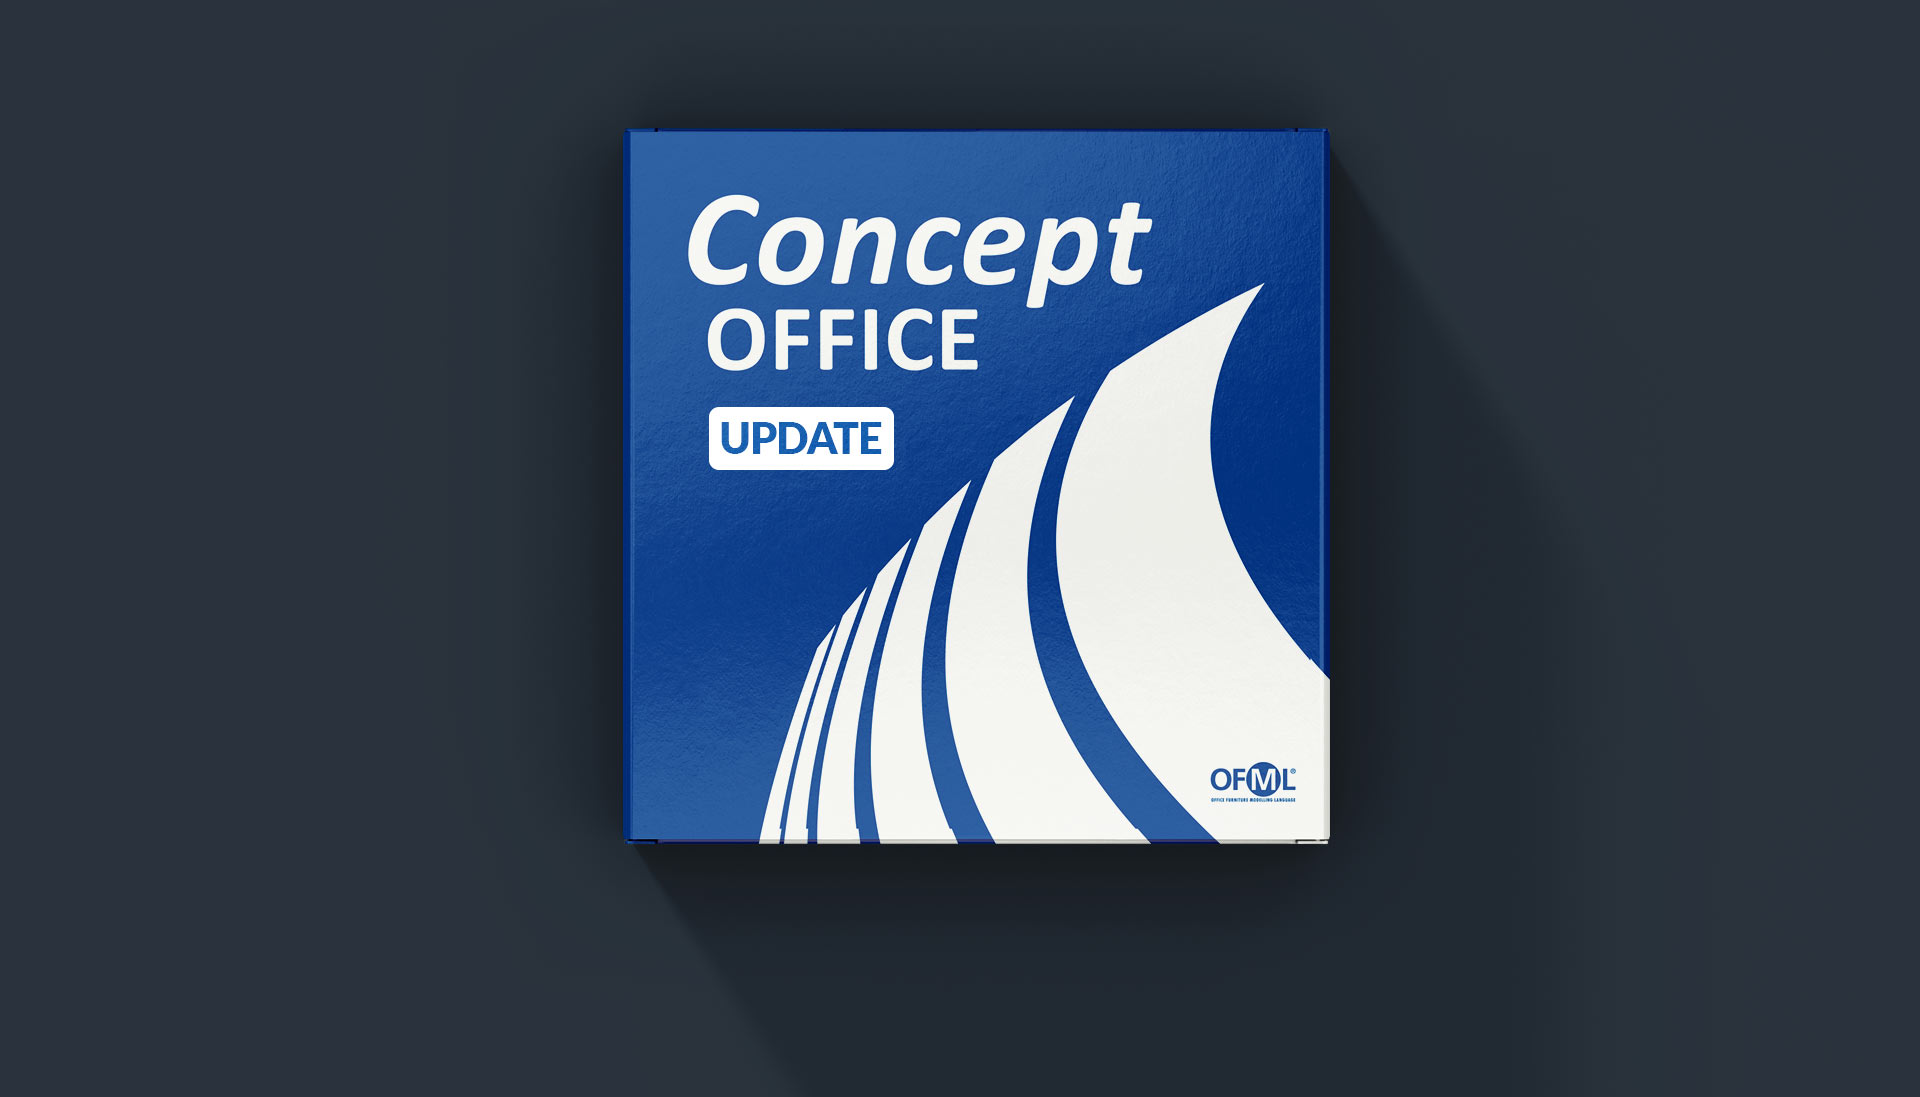 Concept Office Update 7.0.6635